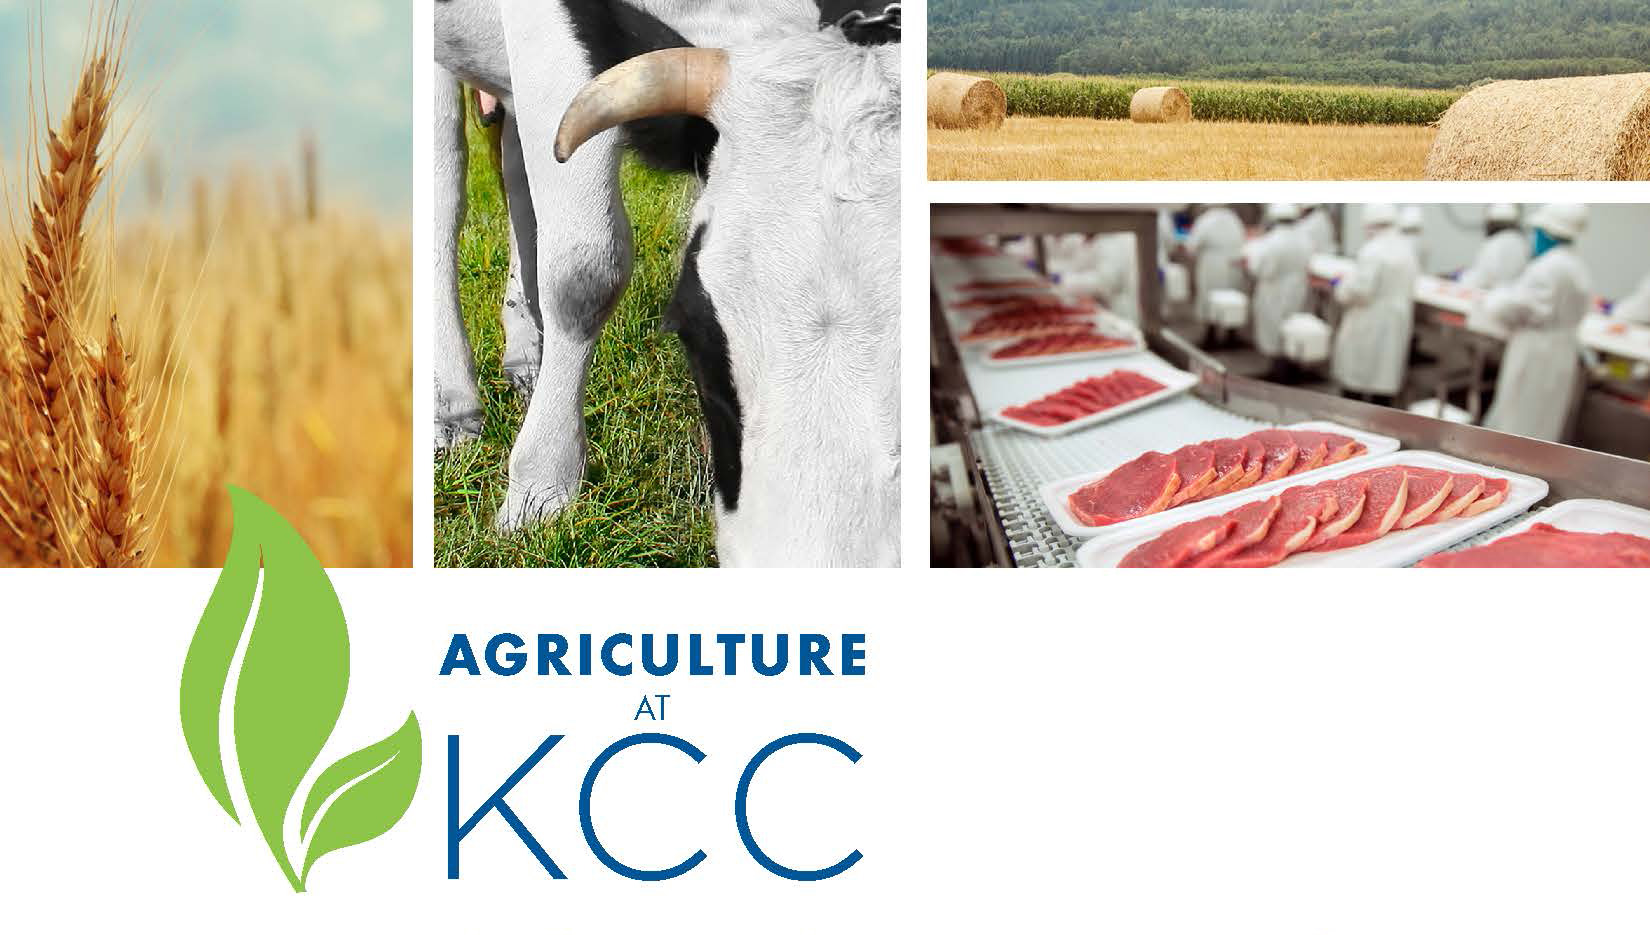 Closeup photos of wheat, a cow and processed meat on a promotional slide for KCC's Agricultural Operations Program.